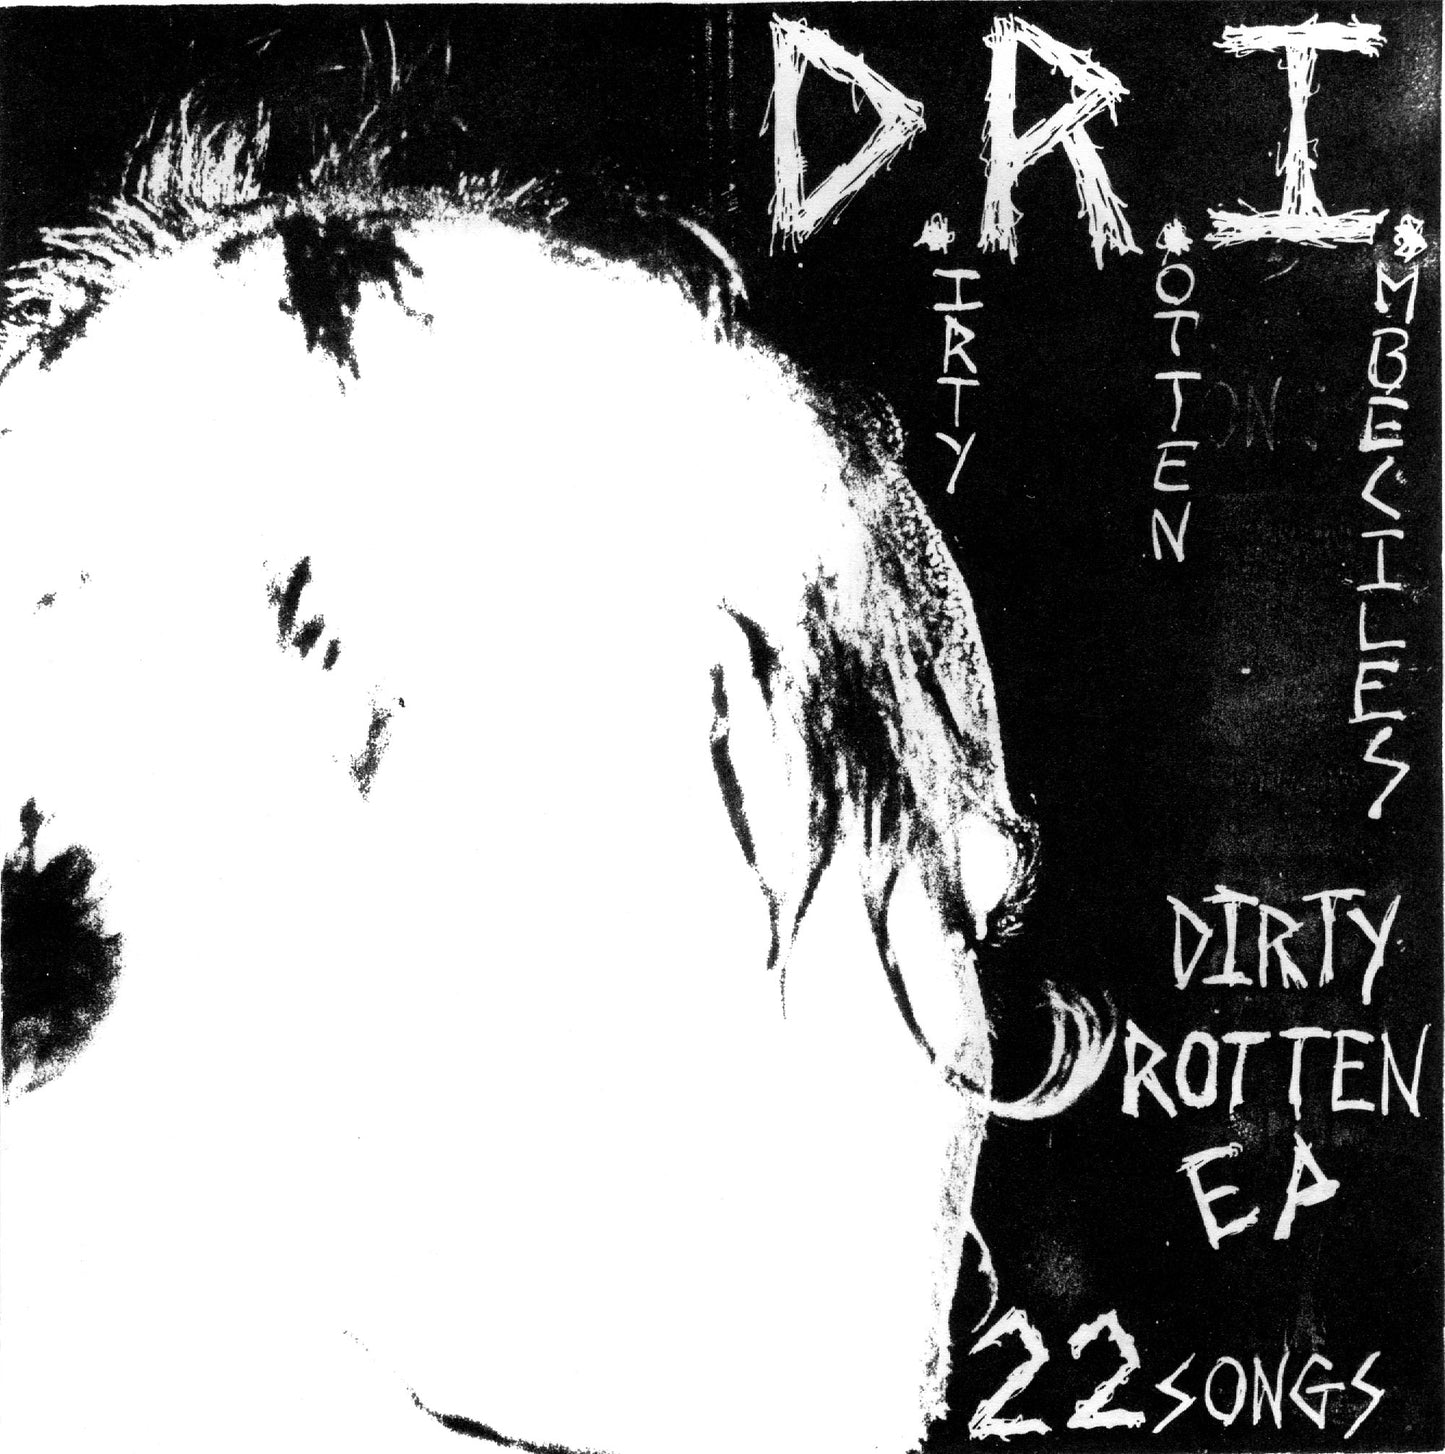 D.R.I. "Dirty Rotten EP" 7"